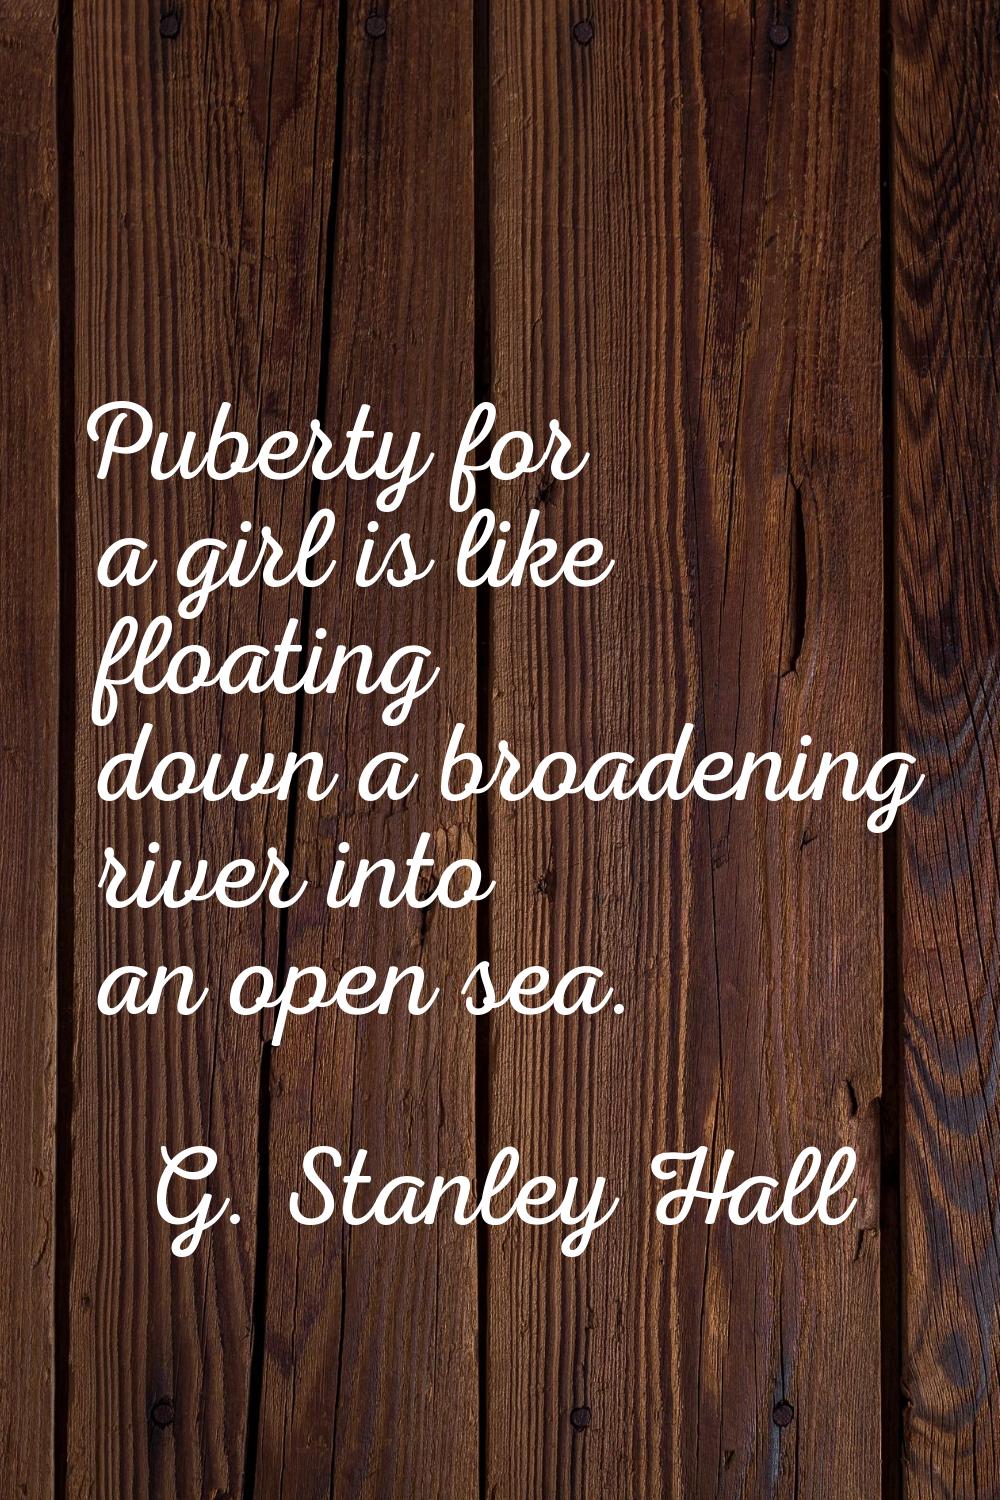 Puberty for a girl is like floating down a broadening river into an open sea.